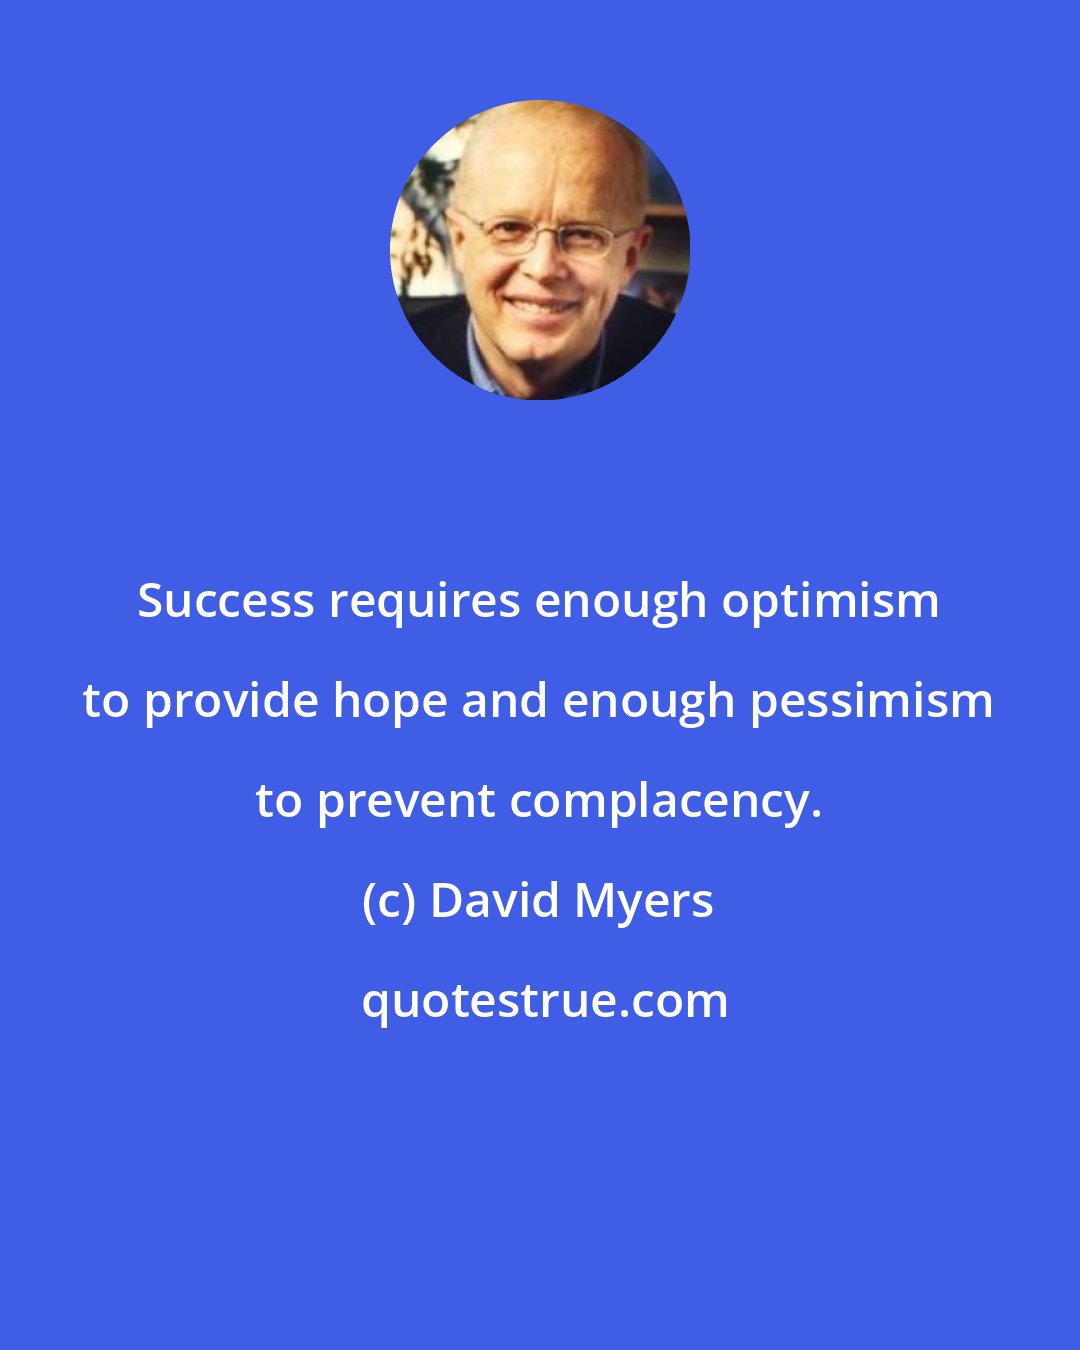 David Myers: Success requires enough optimism to provide hope and enough pessimism to prevent complacency.